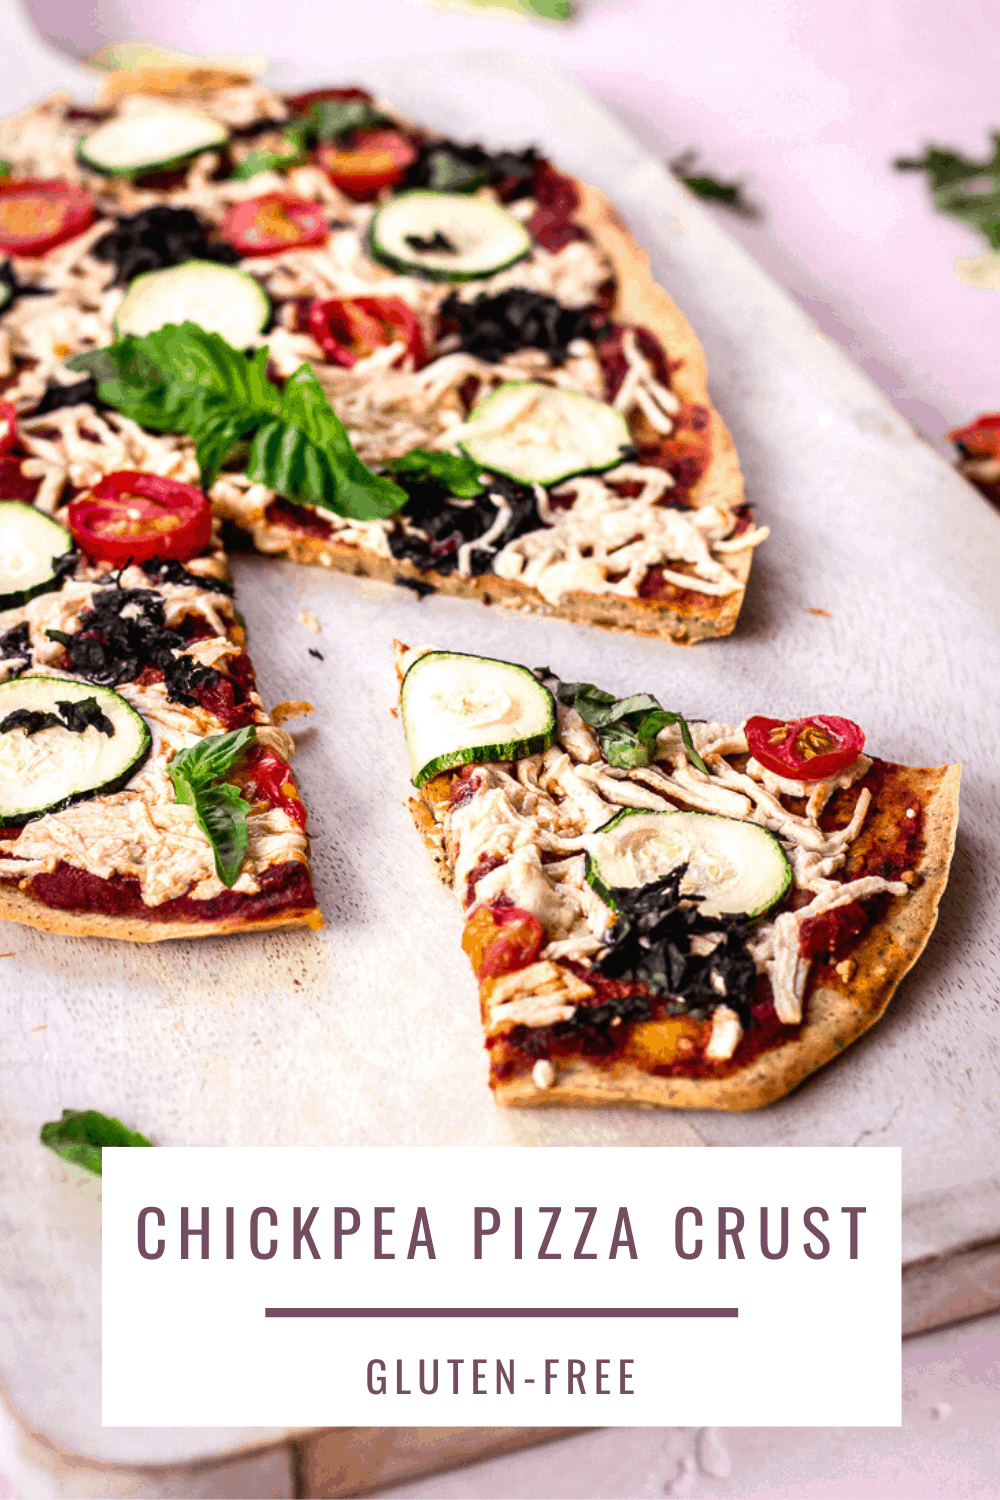 Crispy, gluten-free chickpea flour pizza crust topped with tomato sauce, vegan cheese, zucchini, spinach and basil. A healthier way to enjoy pizza that's also protein-rich. #chickpea #pizza #glutenfree #vegan #healthy #chickpeaflour #vegancheese